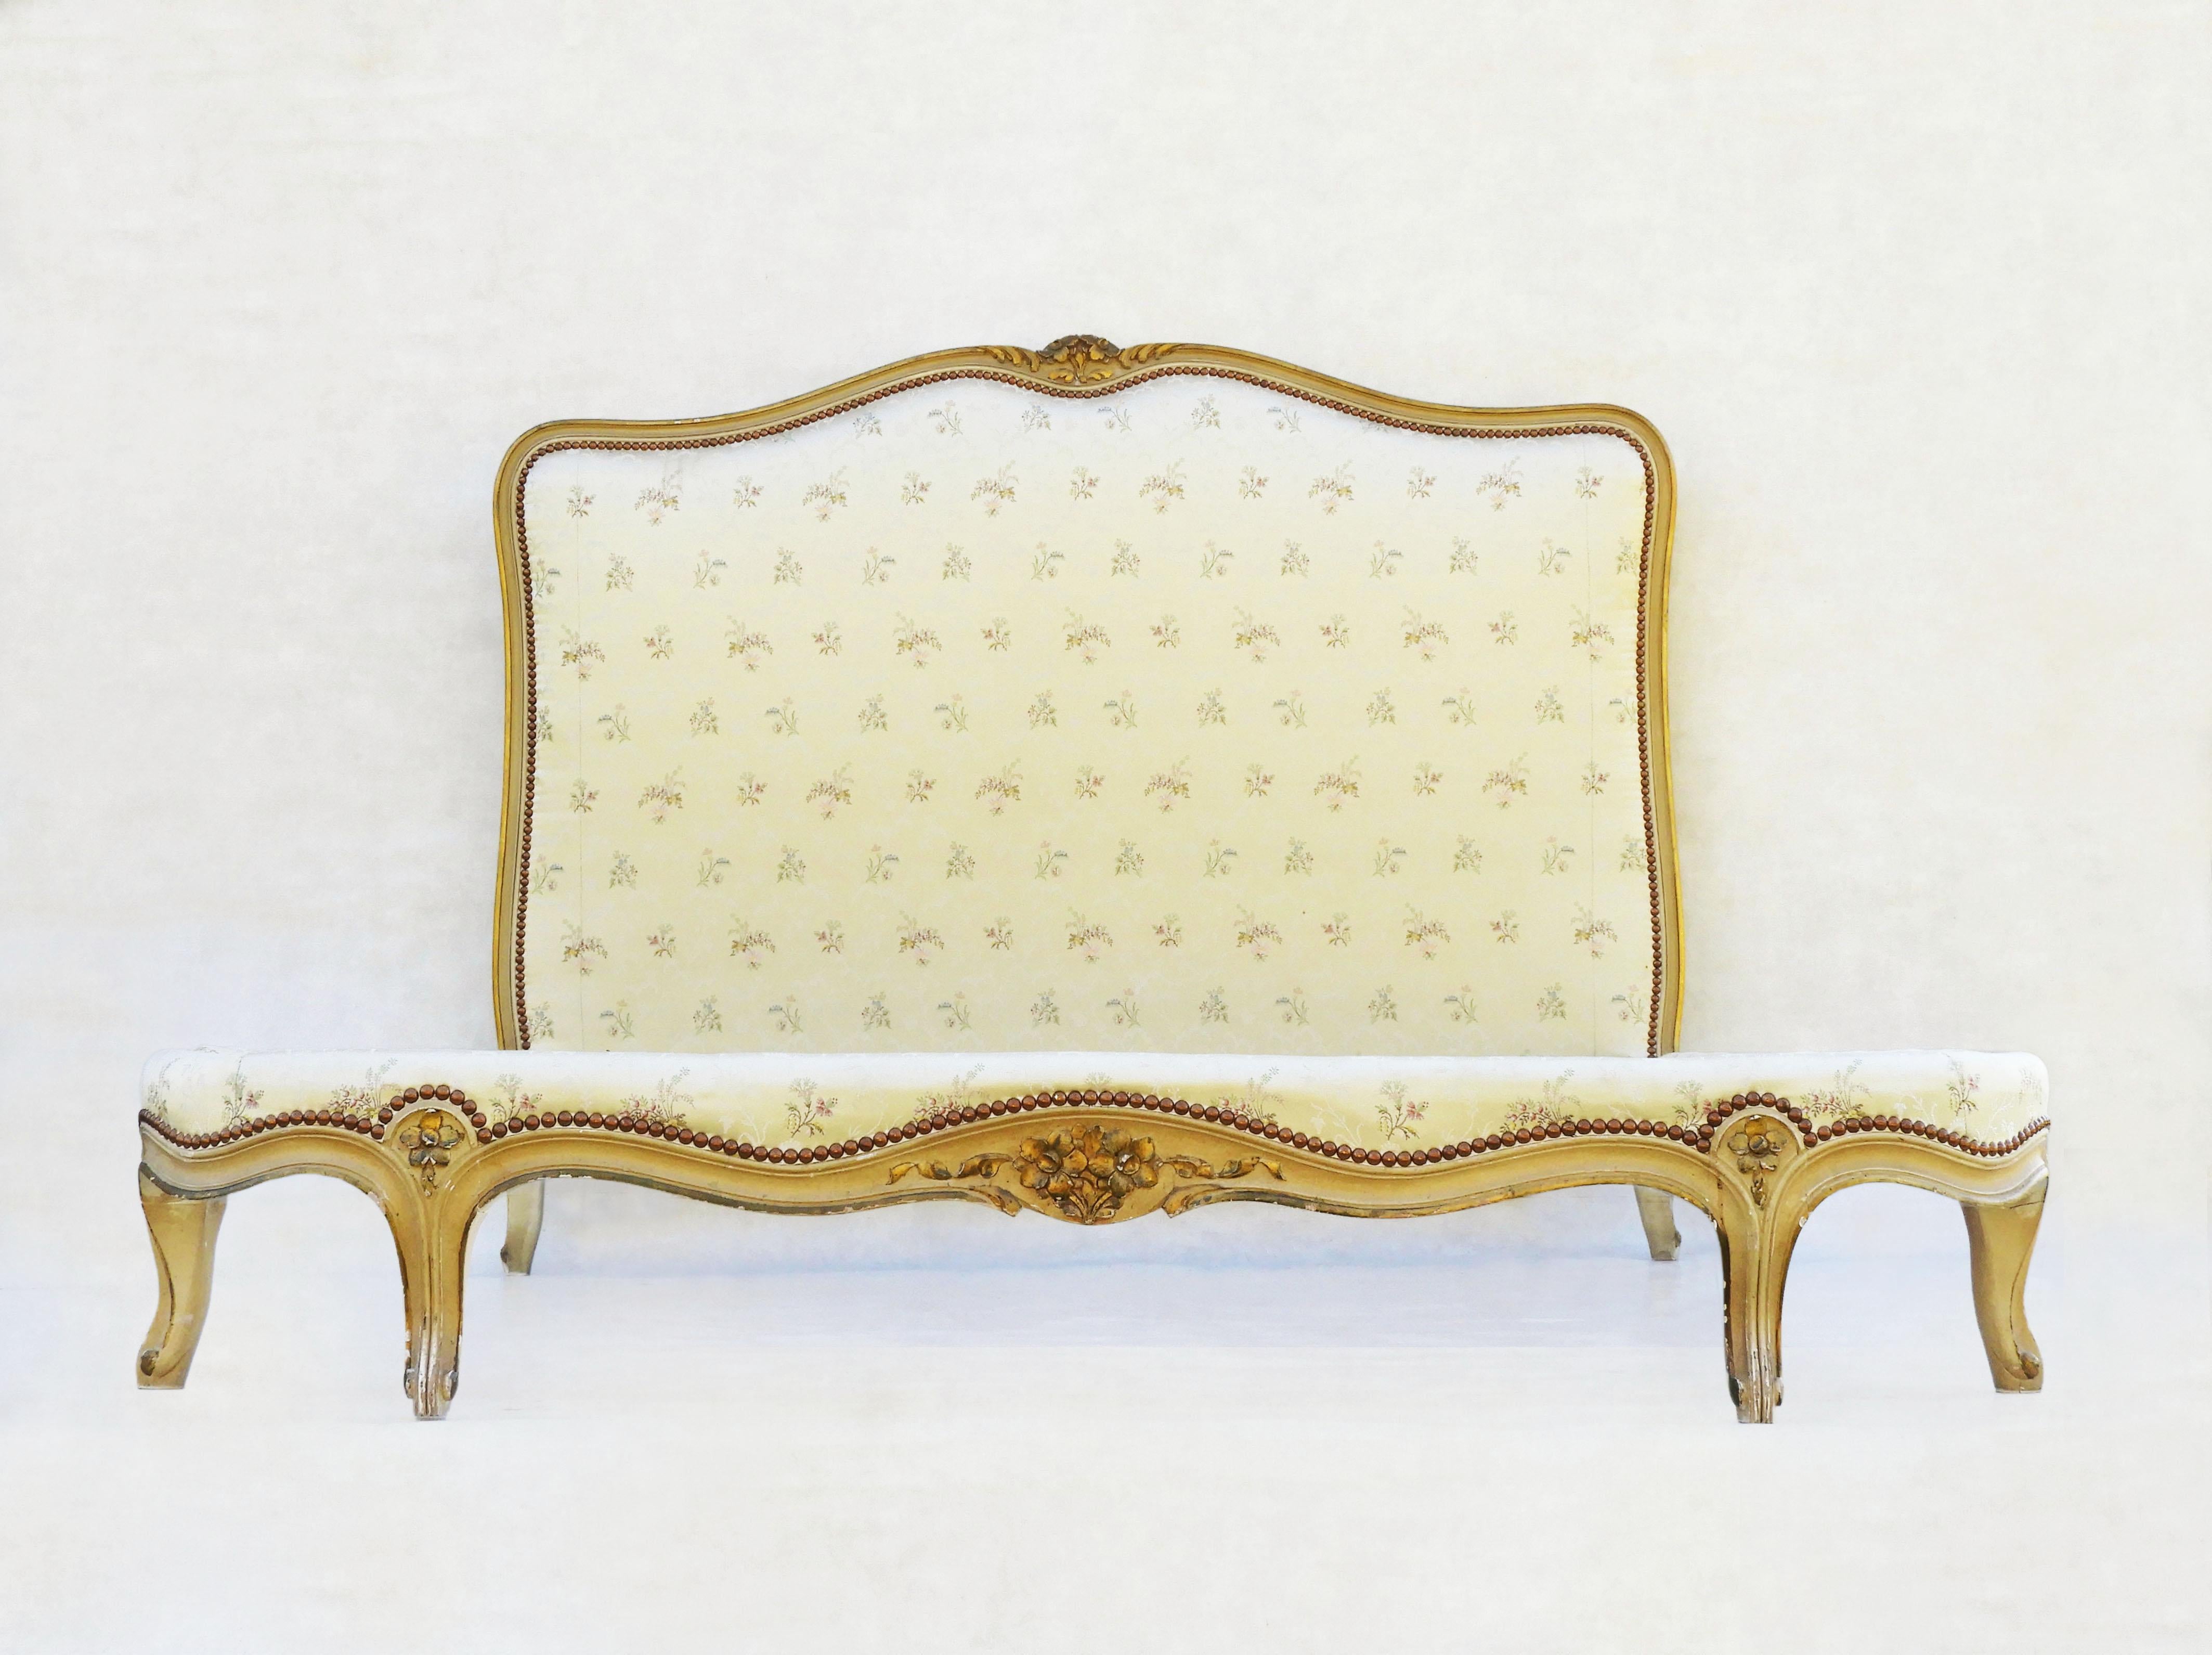 Mid Century Louis XV Revival Bed c1950s Paris
€1,595.00

Gorgeous ‘one of a kind’ Louis XV Revival double bed from 1950s Paris.

A specially commissioned footless bed in satin finish upholstery on a painted wooden frame with gilded detailing. All